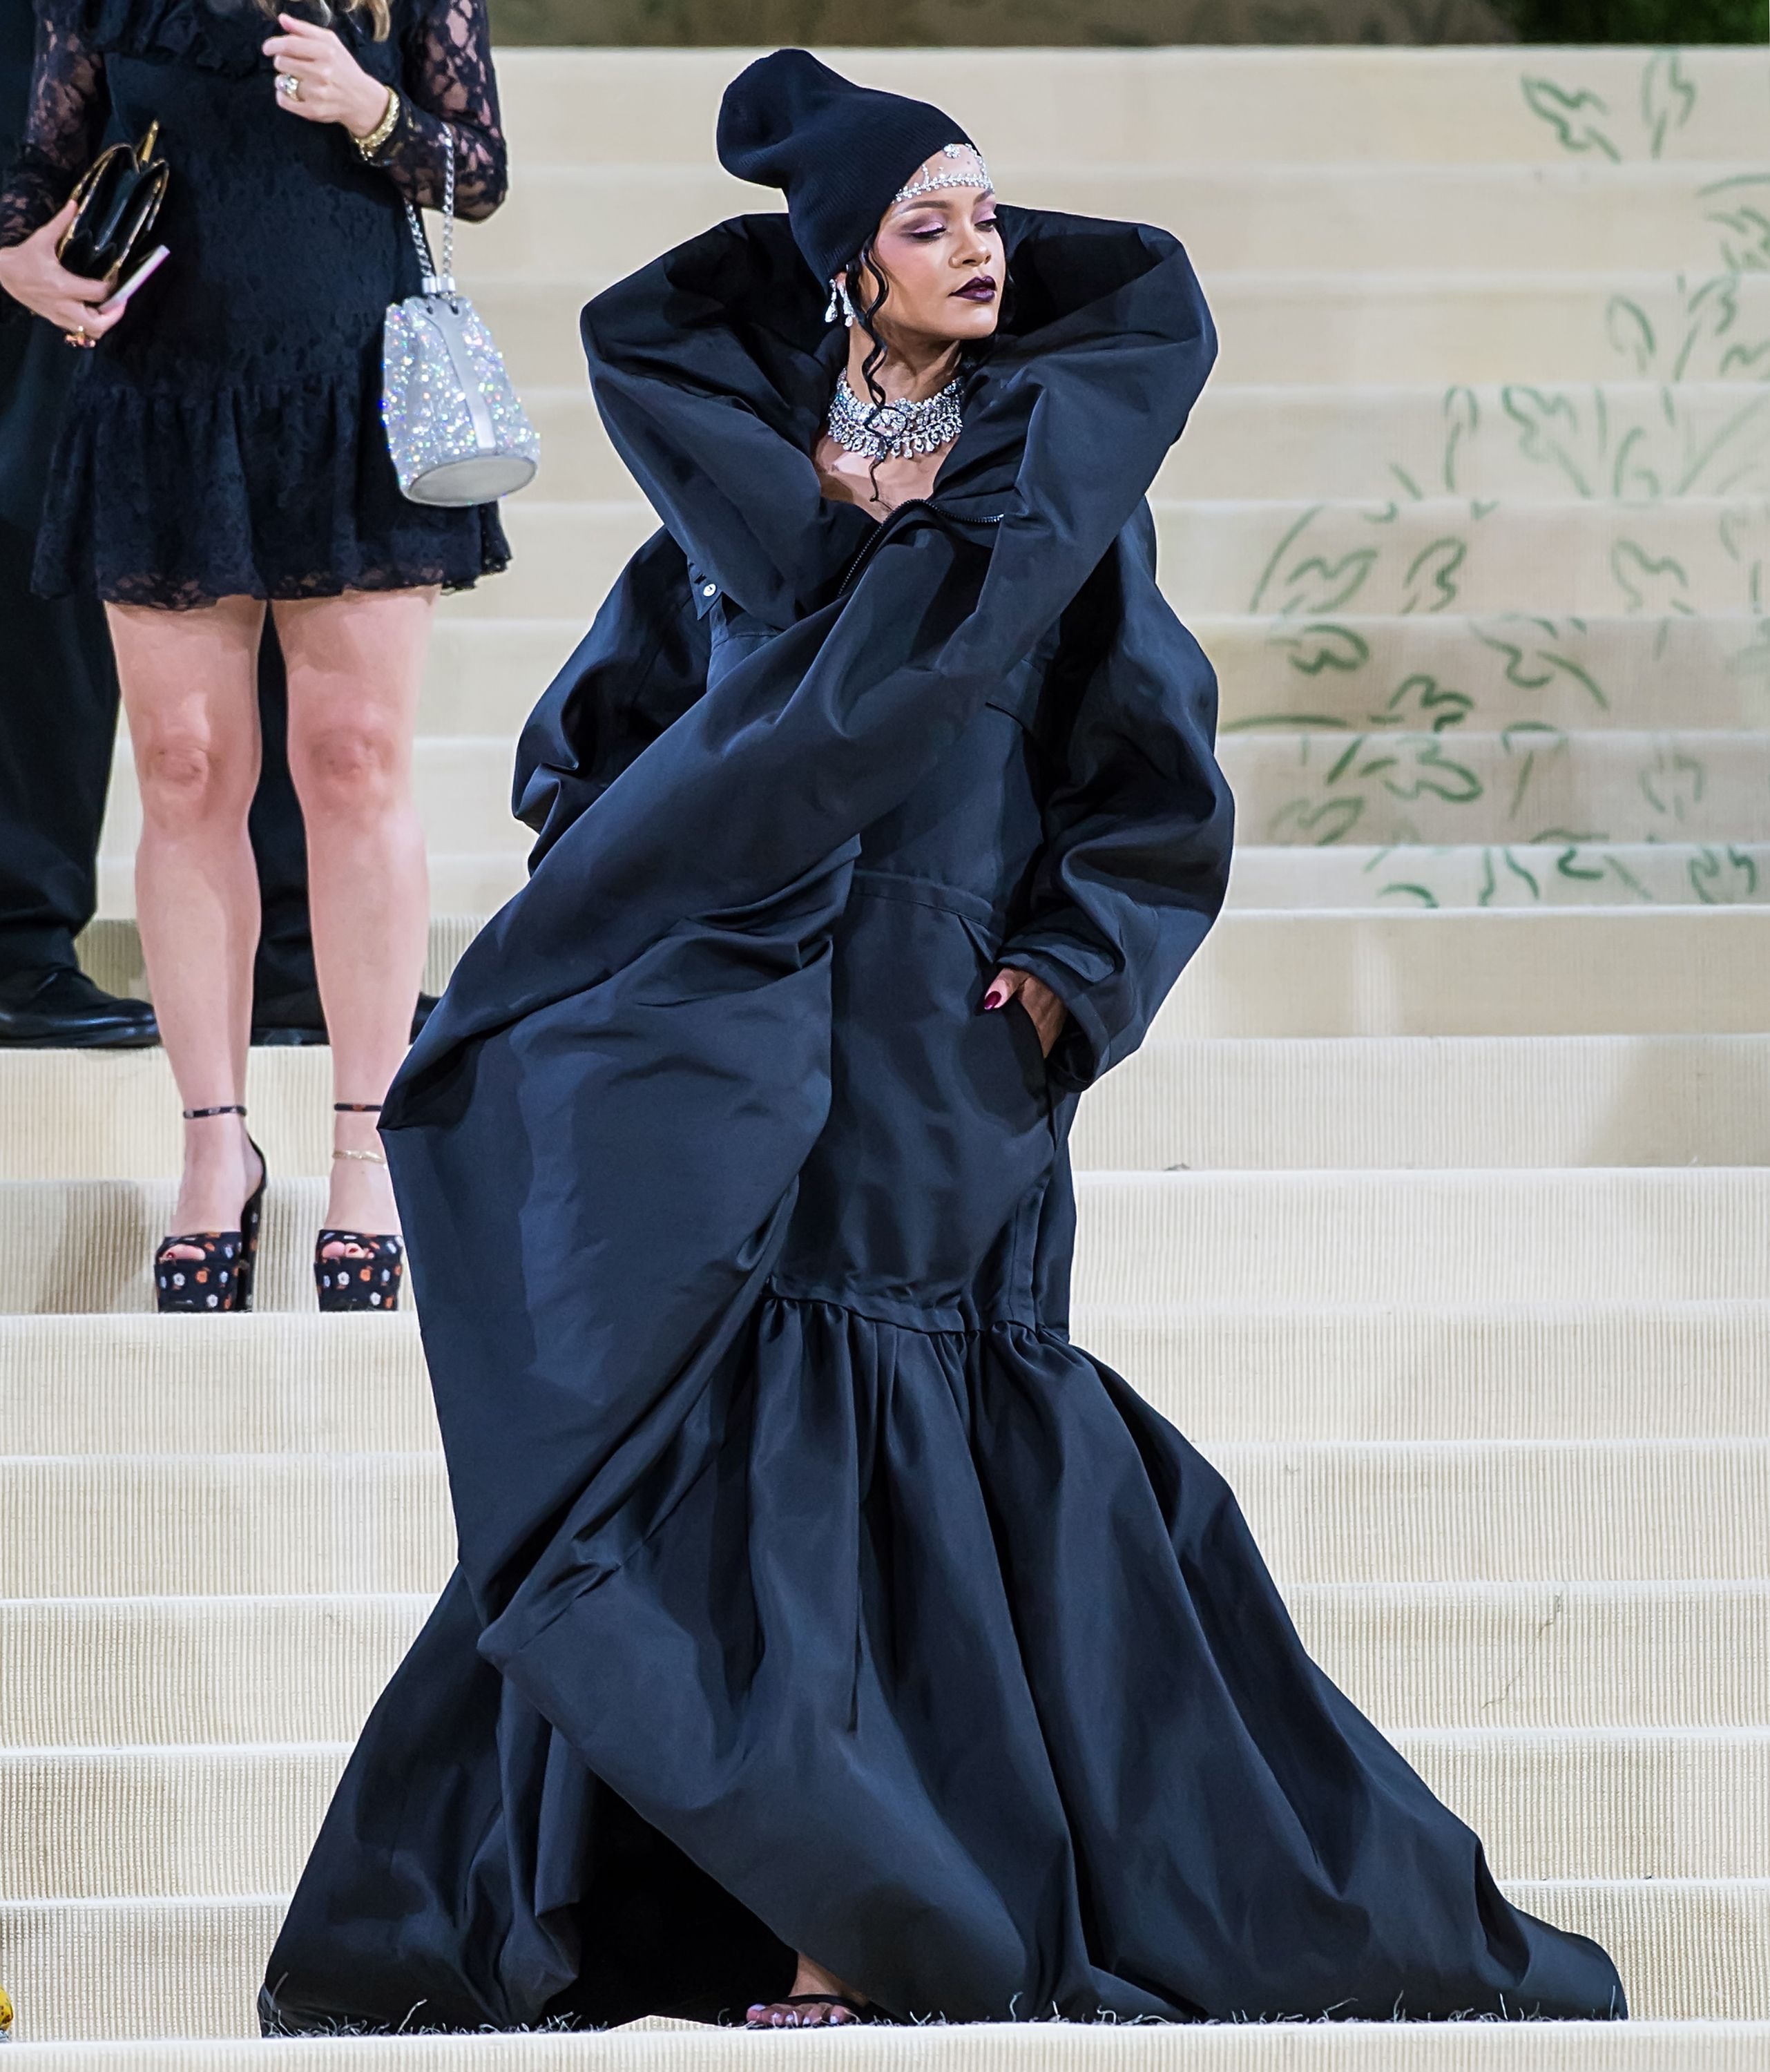 Met Gala 2021: Date, Theme and Seating Chart for This Year's Event